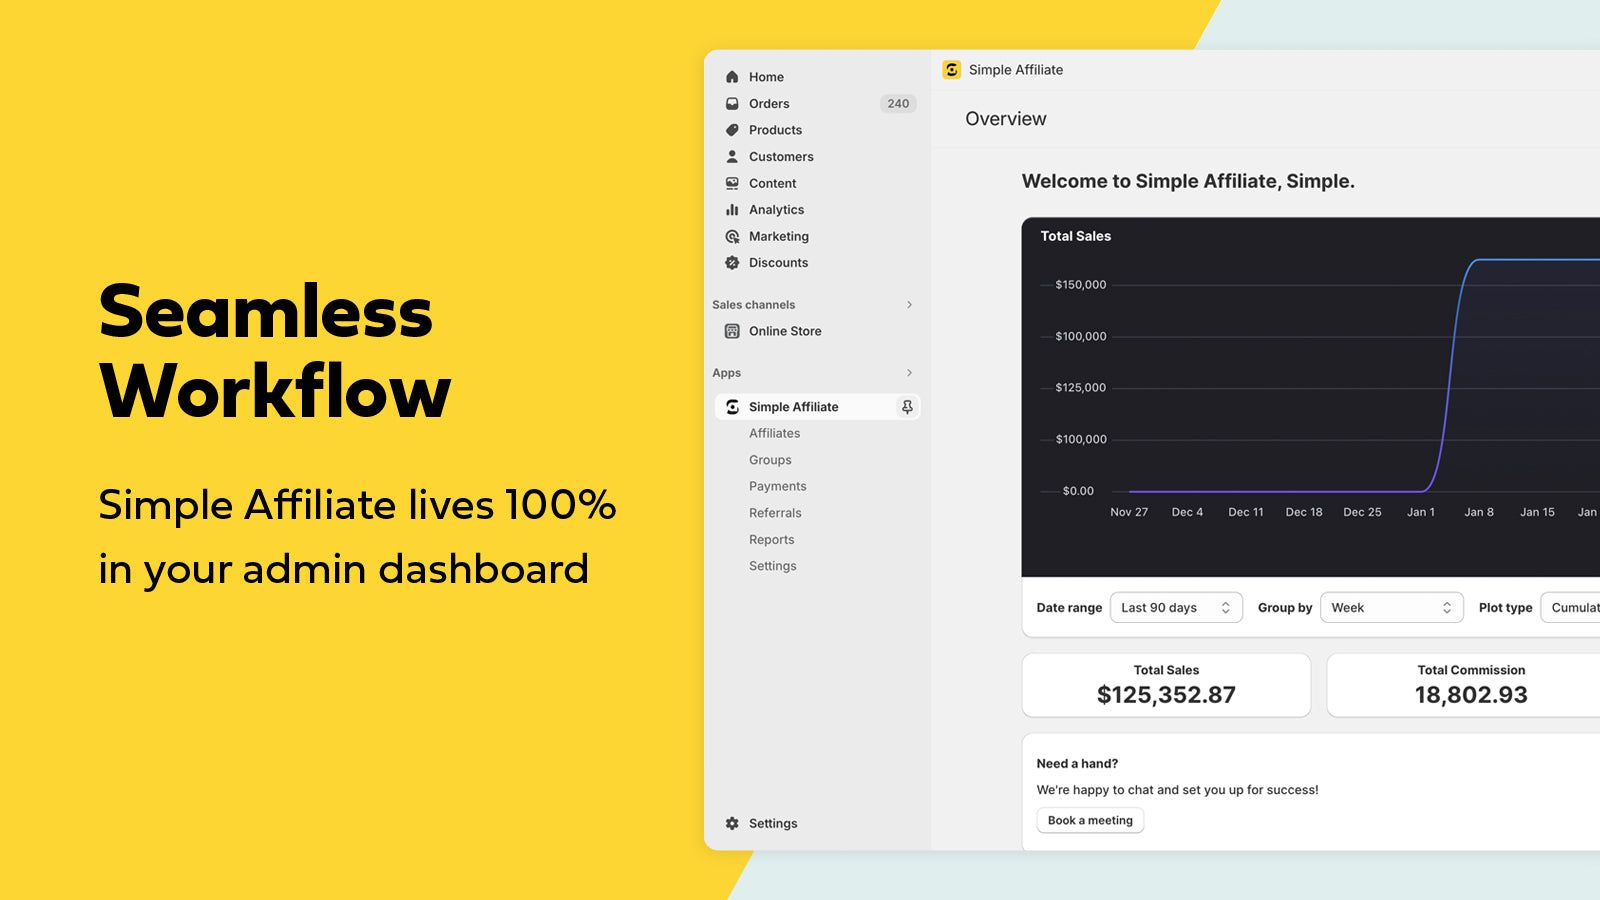 Seamless workflow - Simple affiliate lives 100% in your admin